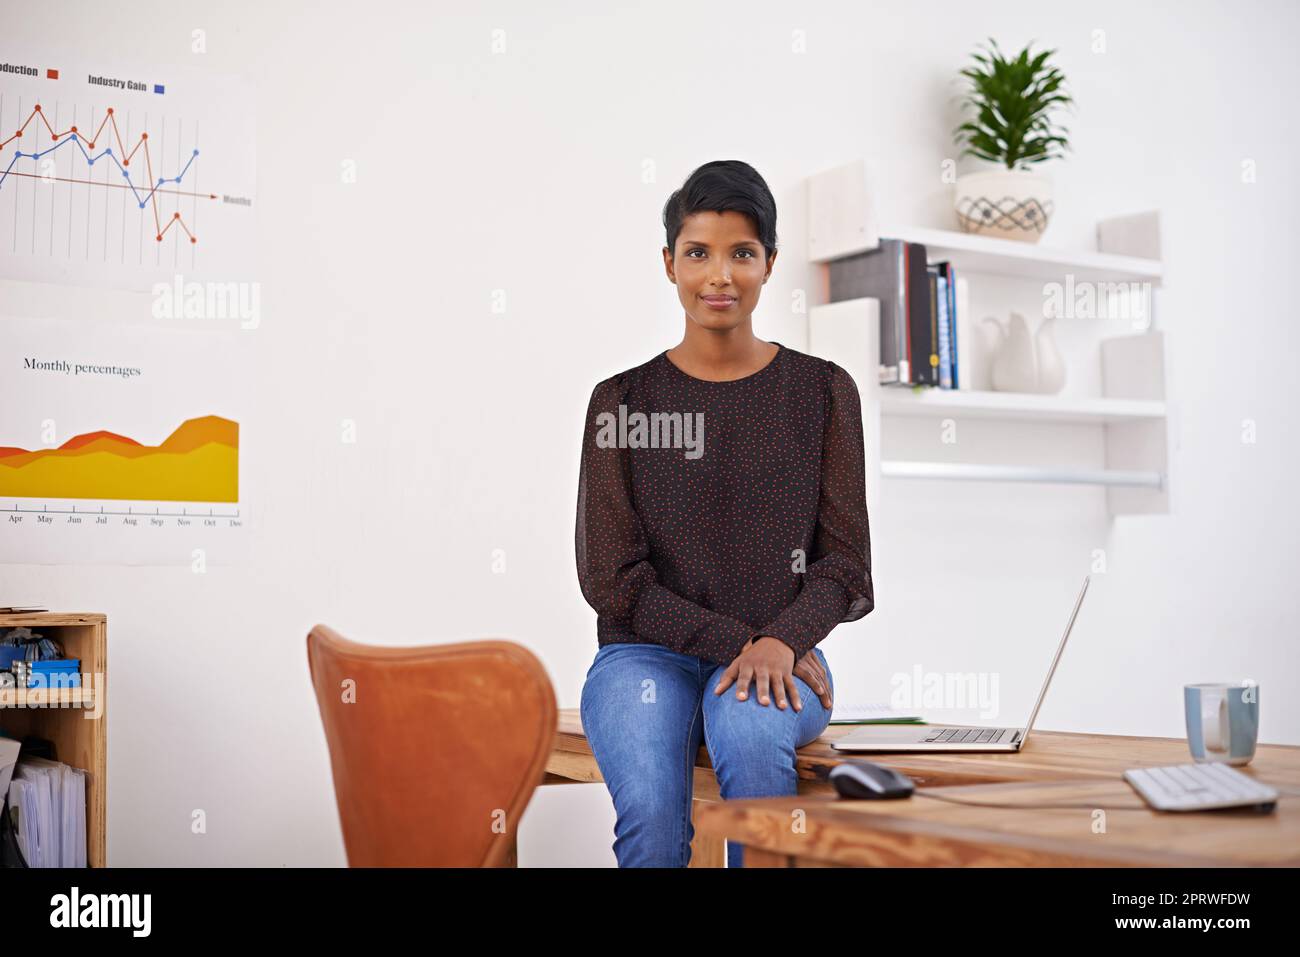 Shes a keen young entrepreneur. A portrait of a beautiful young woman sitting on her desk in her office. Stock Photo